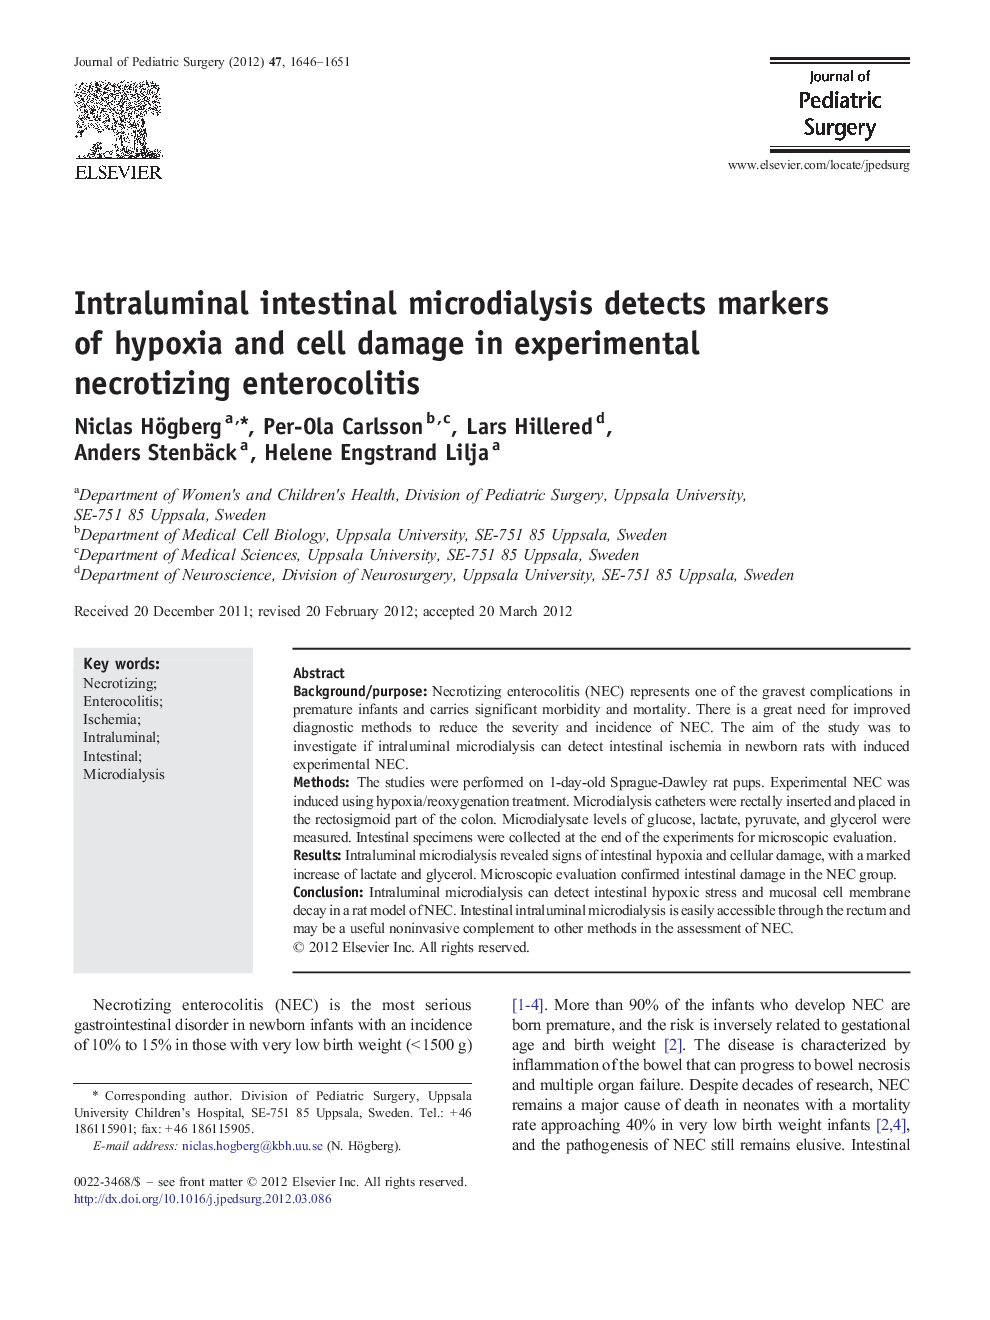 Intraluminal intestinal microdialysis detects markers of hypoxia and cell damage in experimental necrotizing enterocolitis